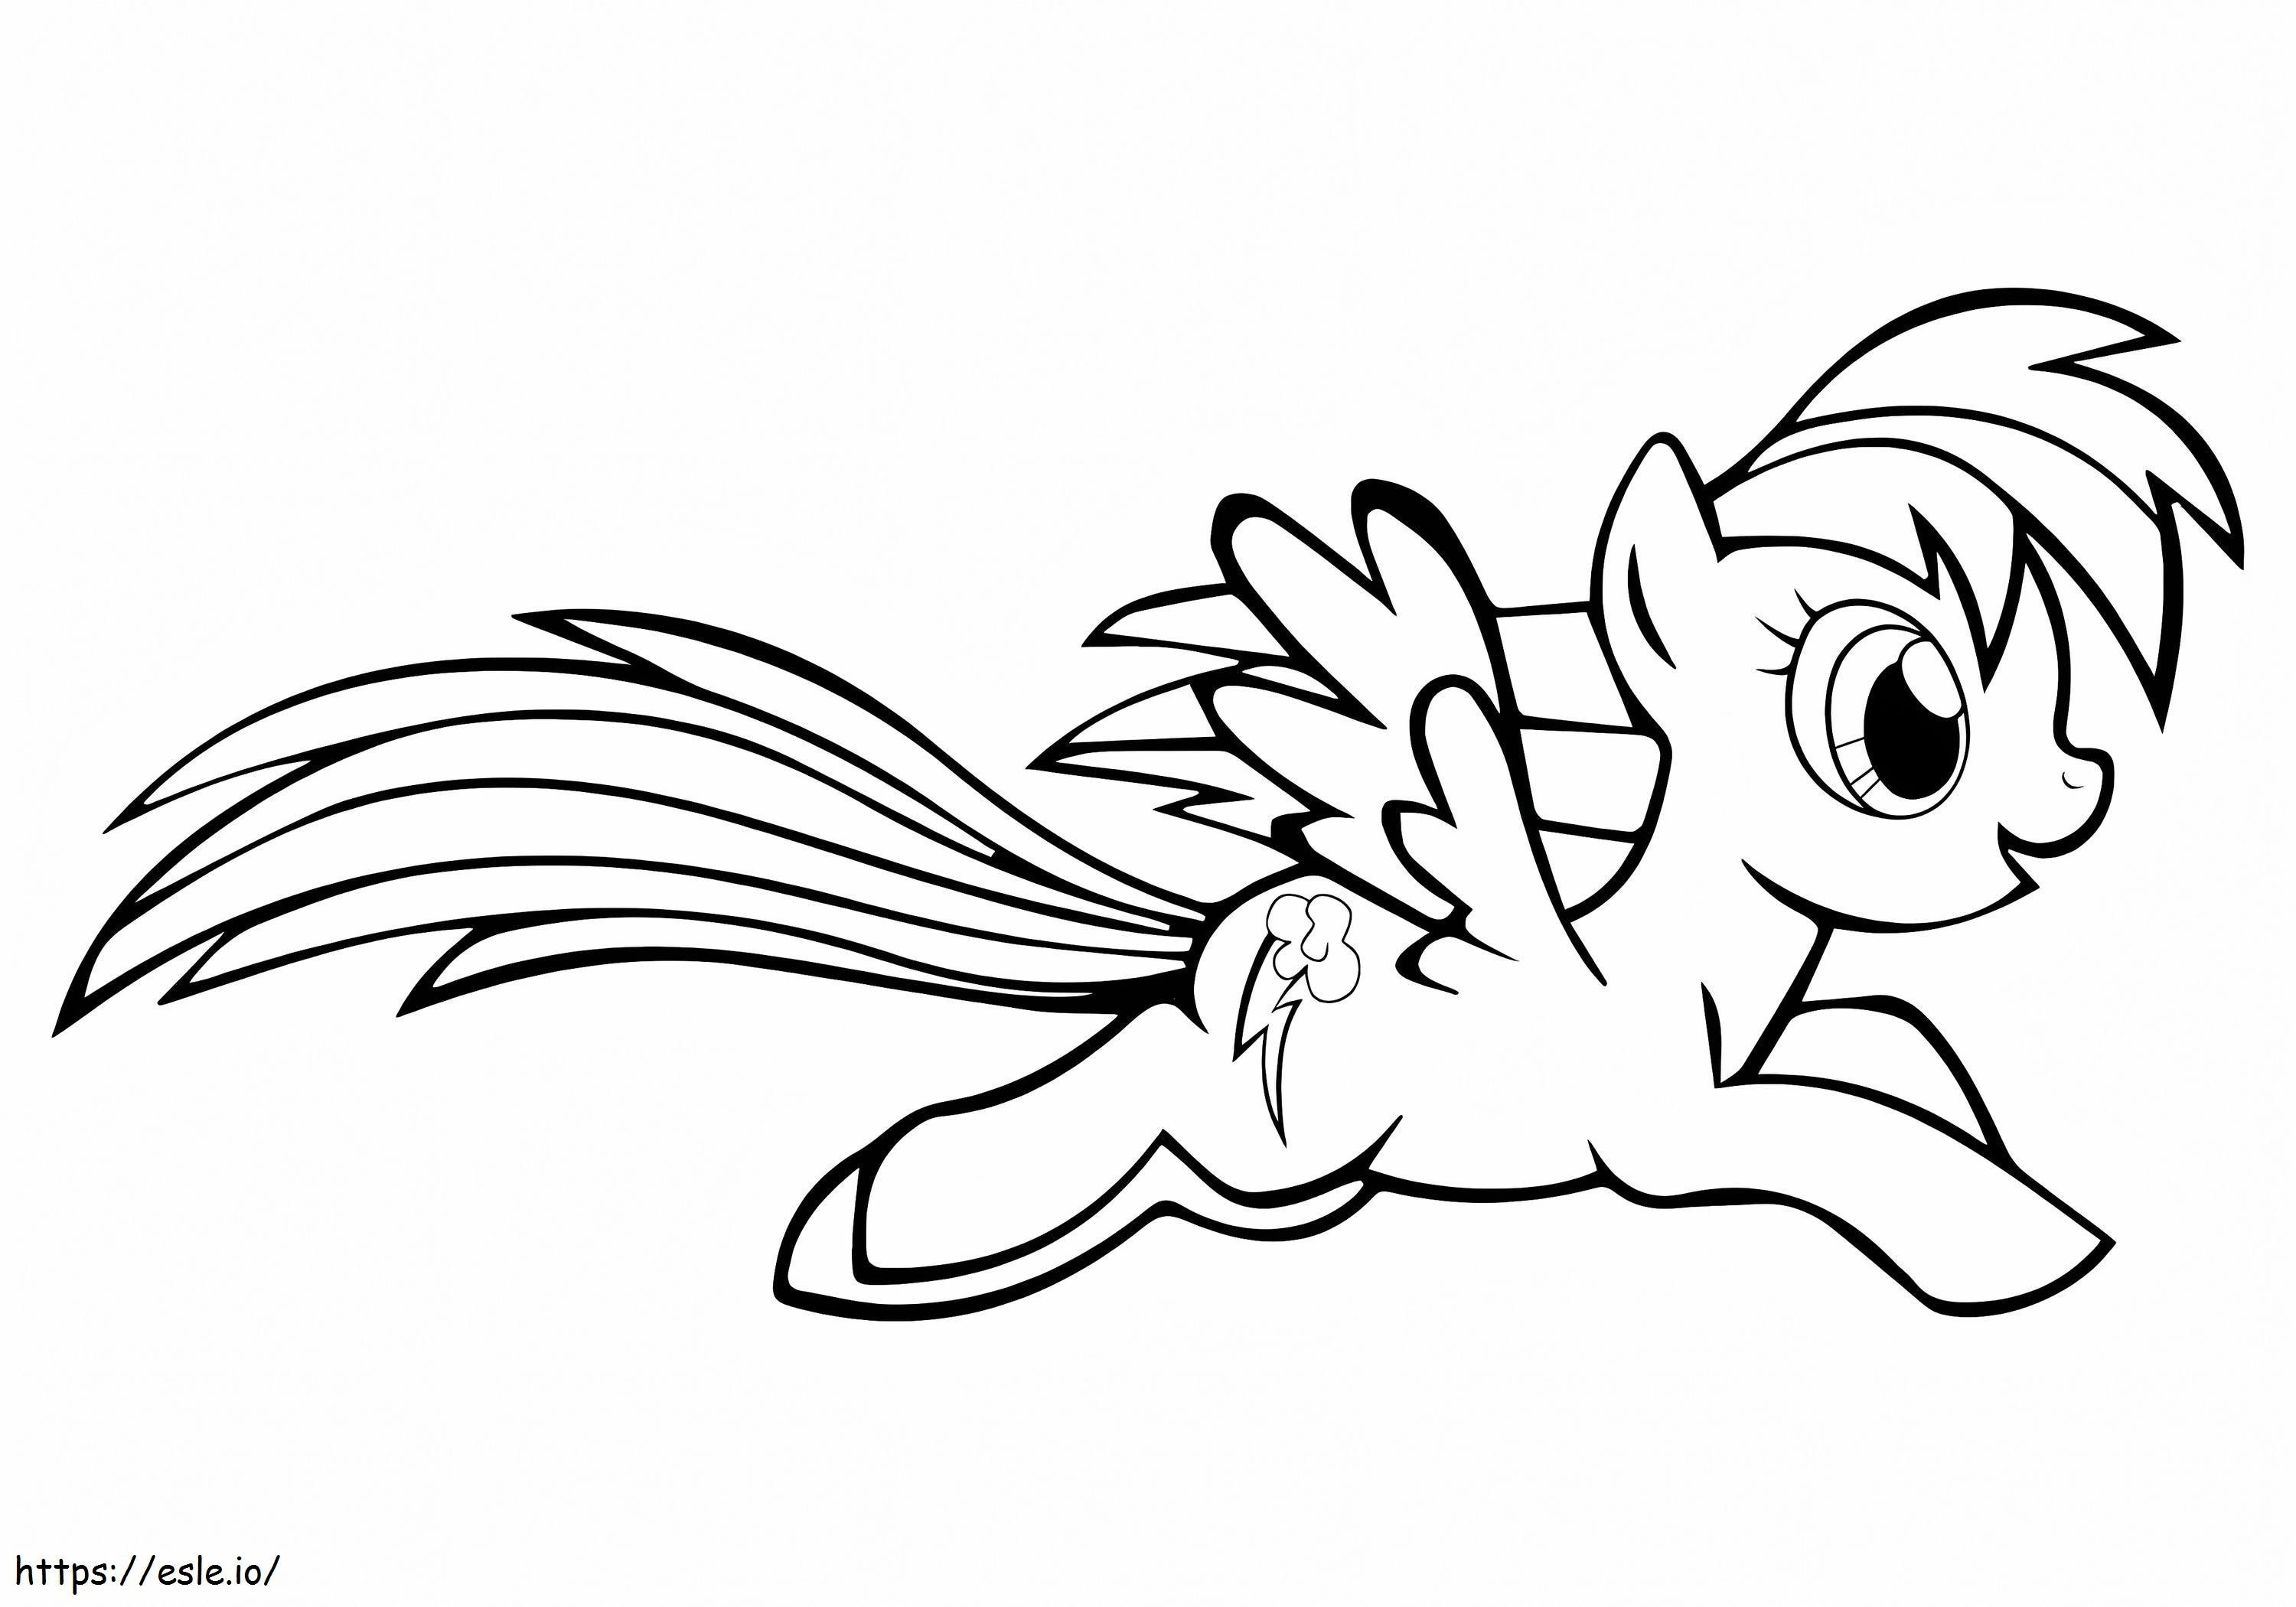 Rainbow Whit Pony coloring page